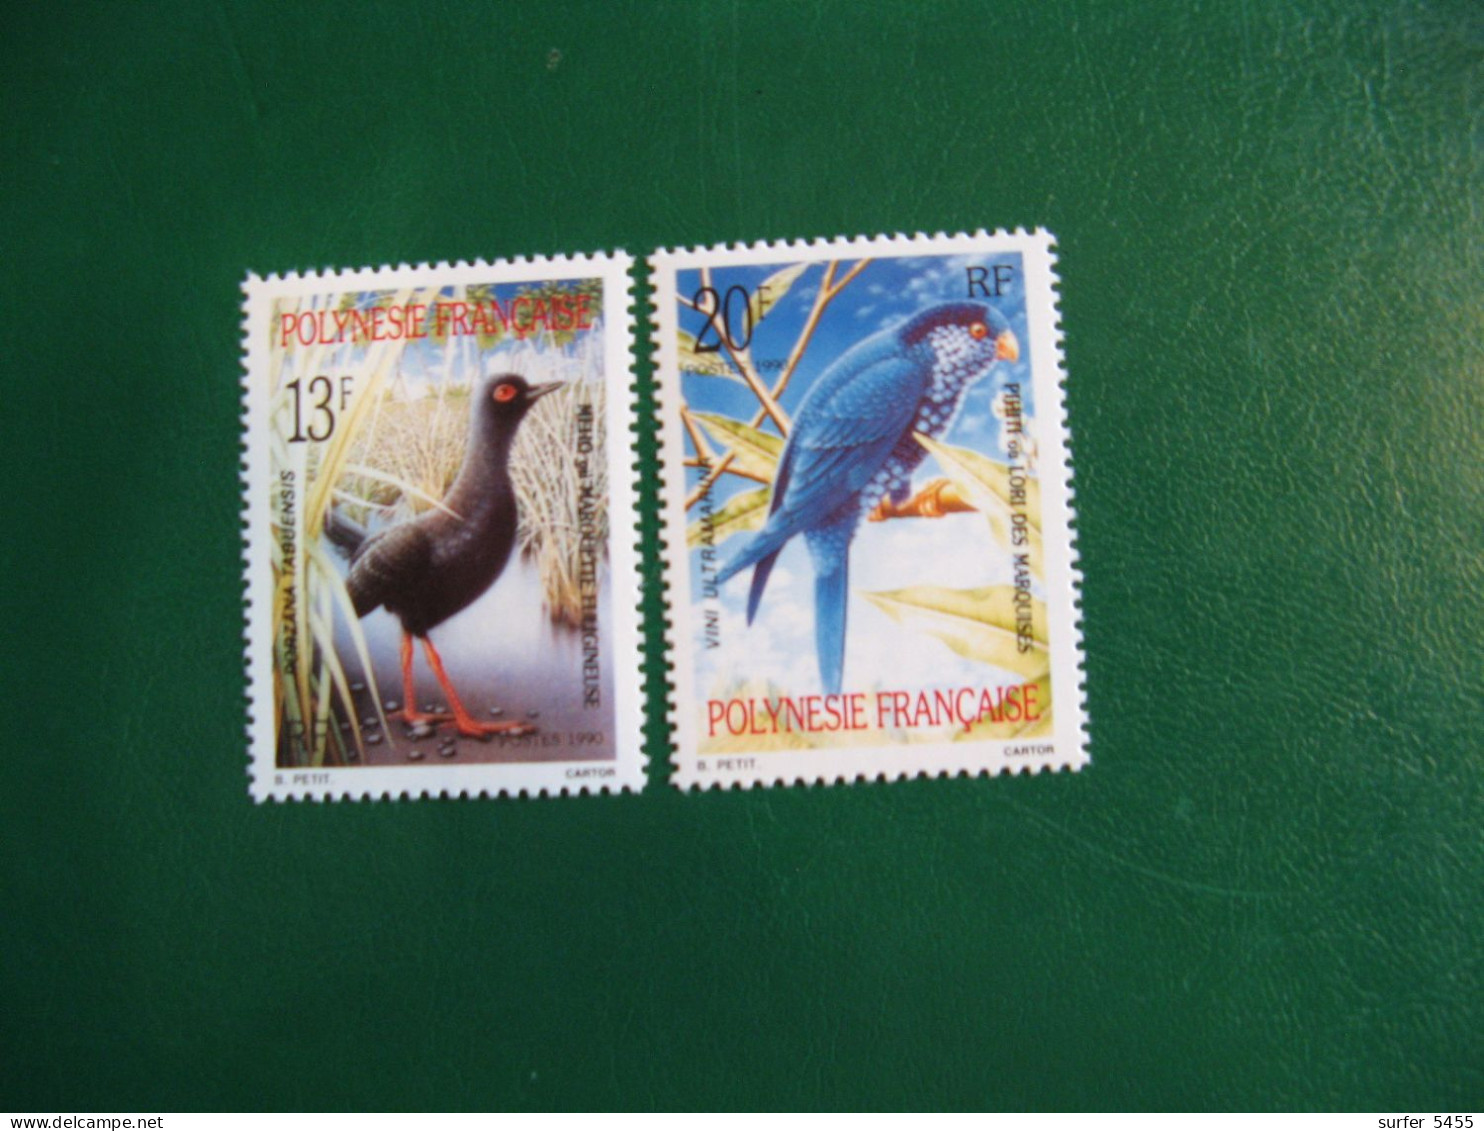 P0LYNESIE YVERT PO ORDINAIRE N° 360/361 TIMBRES NEUFS ** LUXE - MNH - SERIE COMPLETE- COTE 1,85 EURO - Ungebraucht